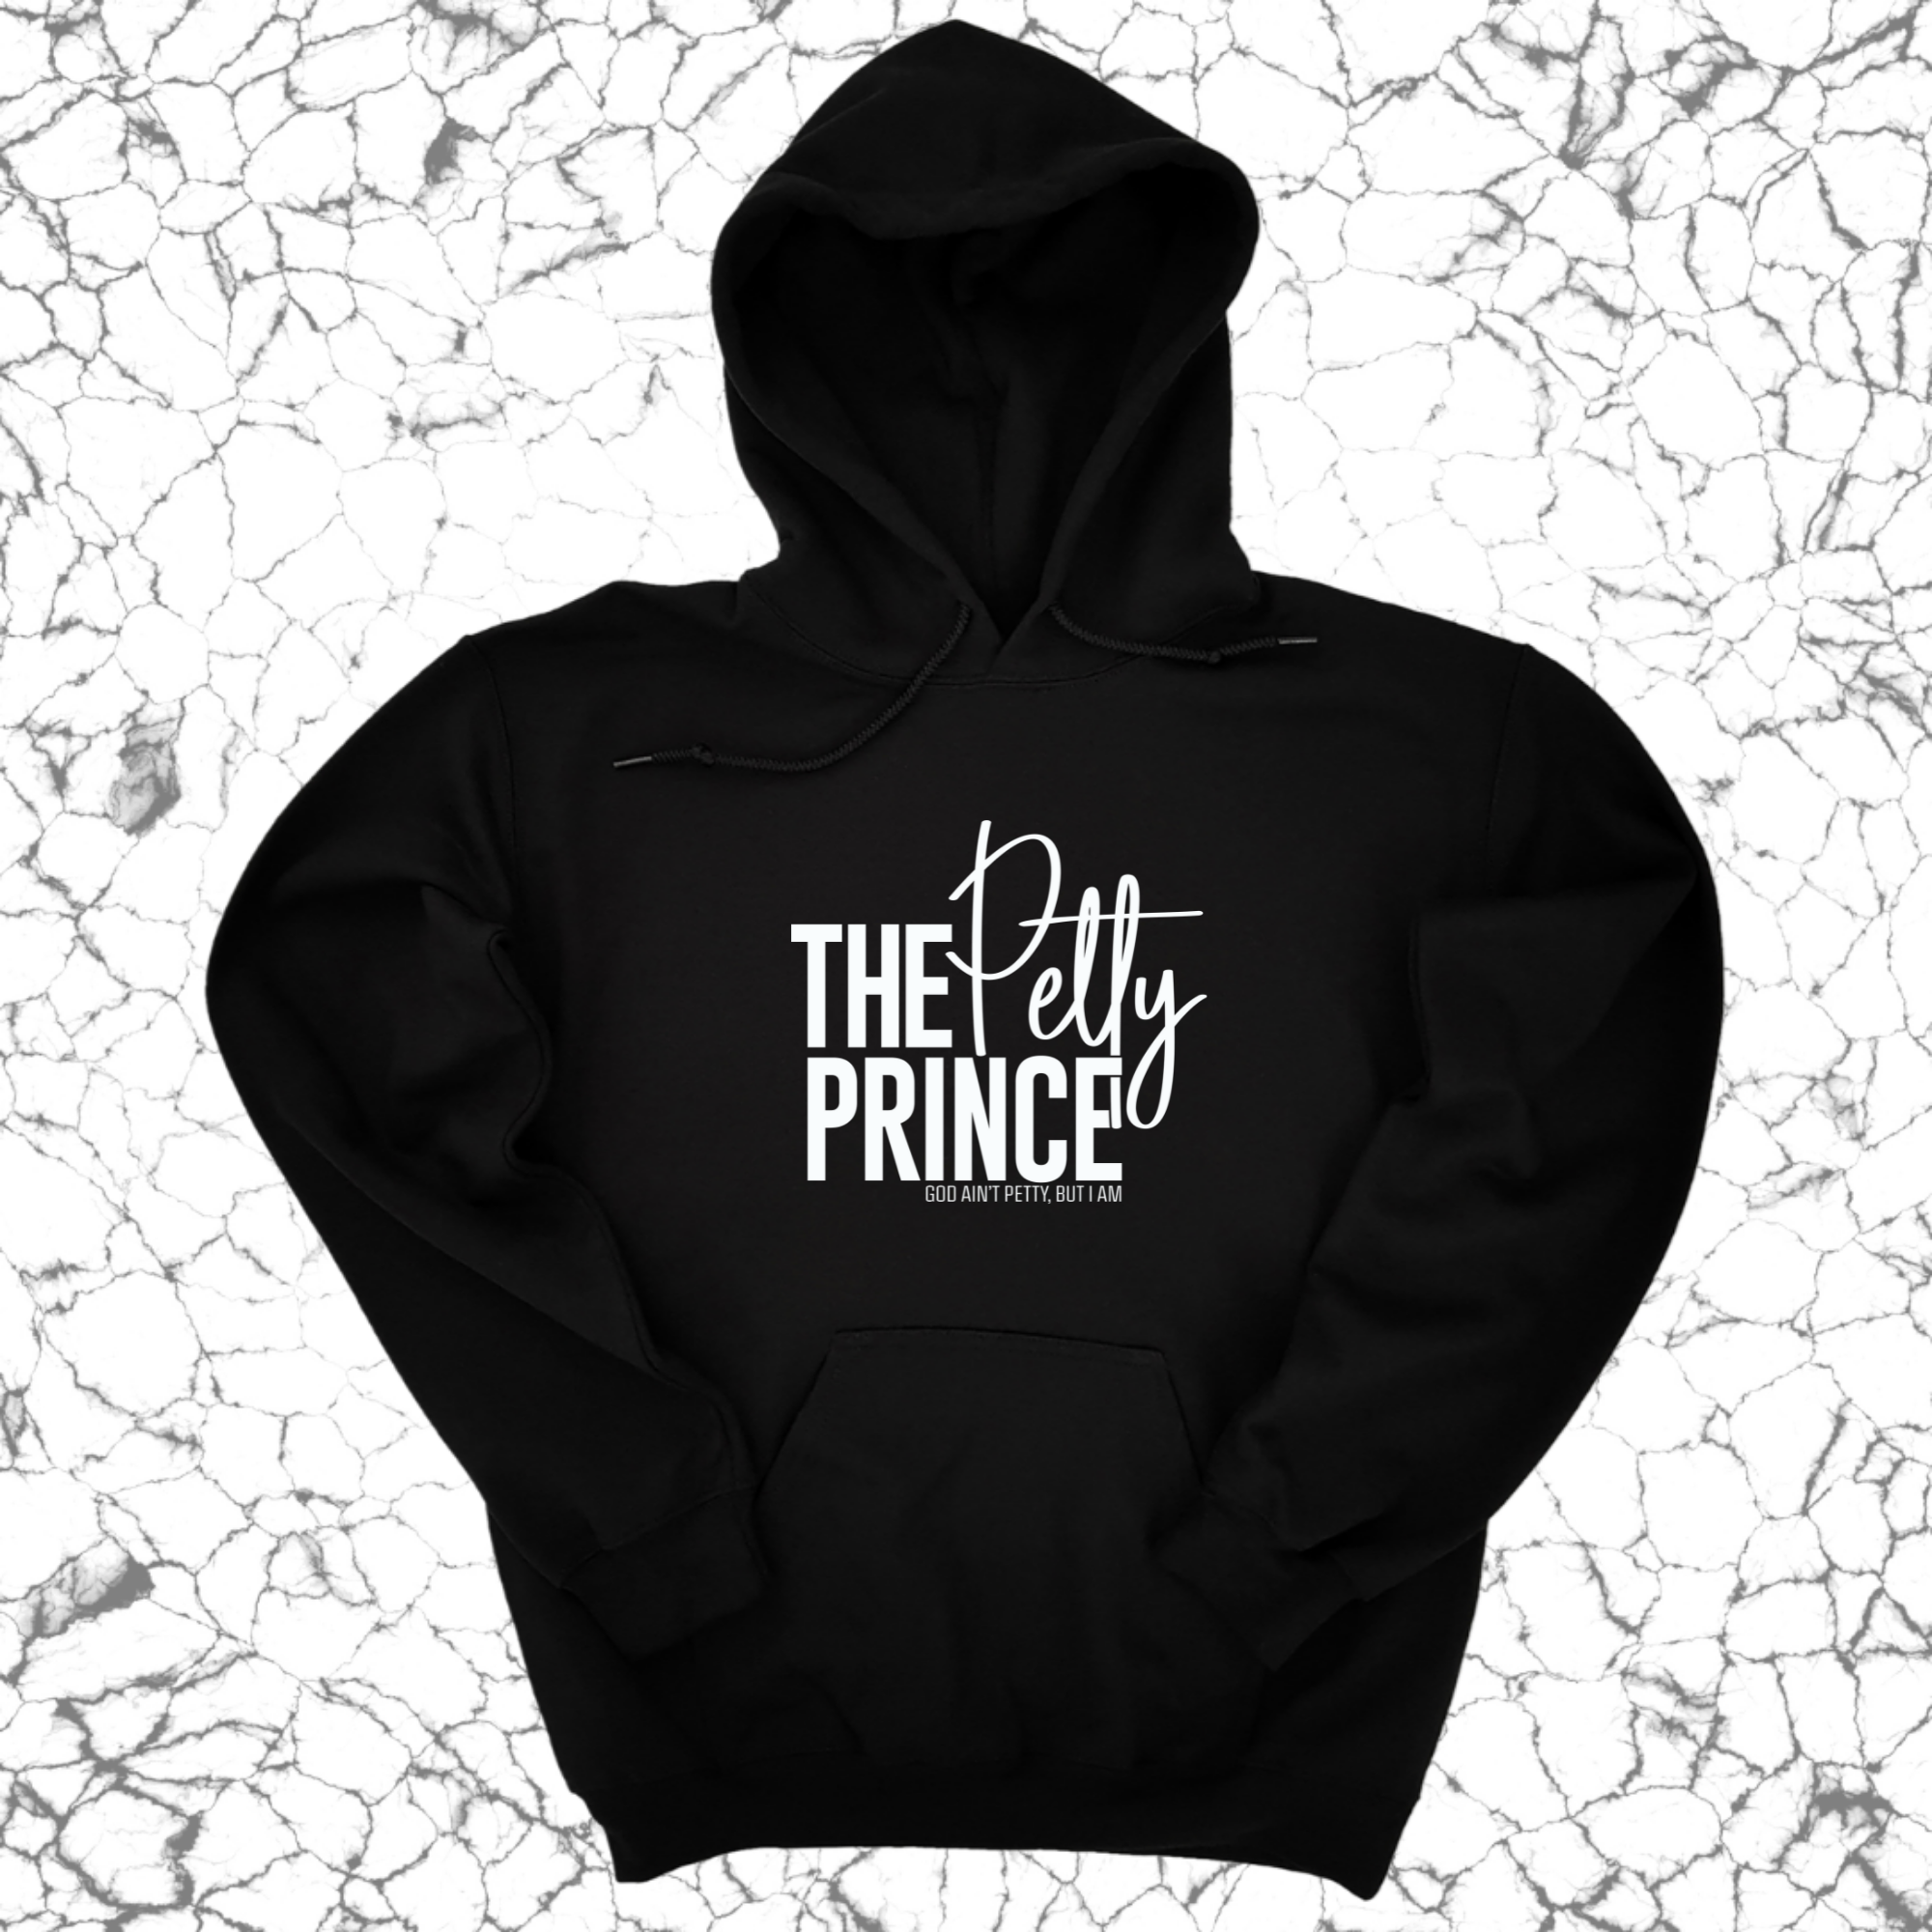 IMPERFECT - THE PETTY PRINCE HOODIE BLACK/WHITE LARGE-The Original God Ain't Petty But I Am